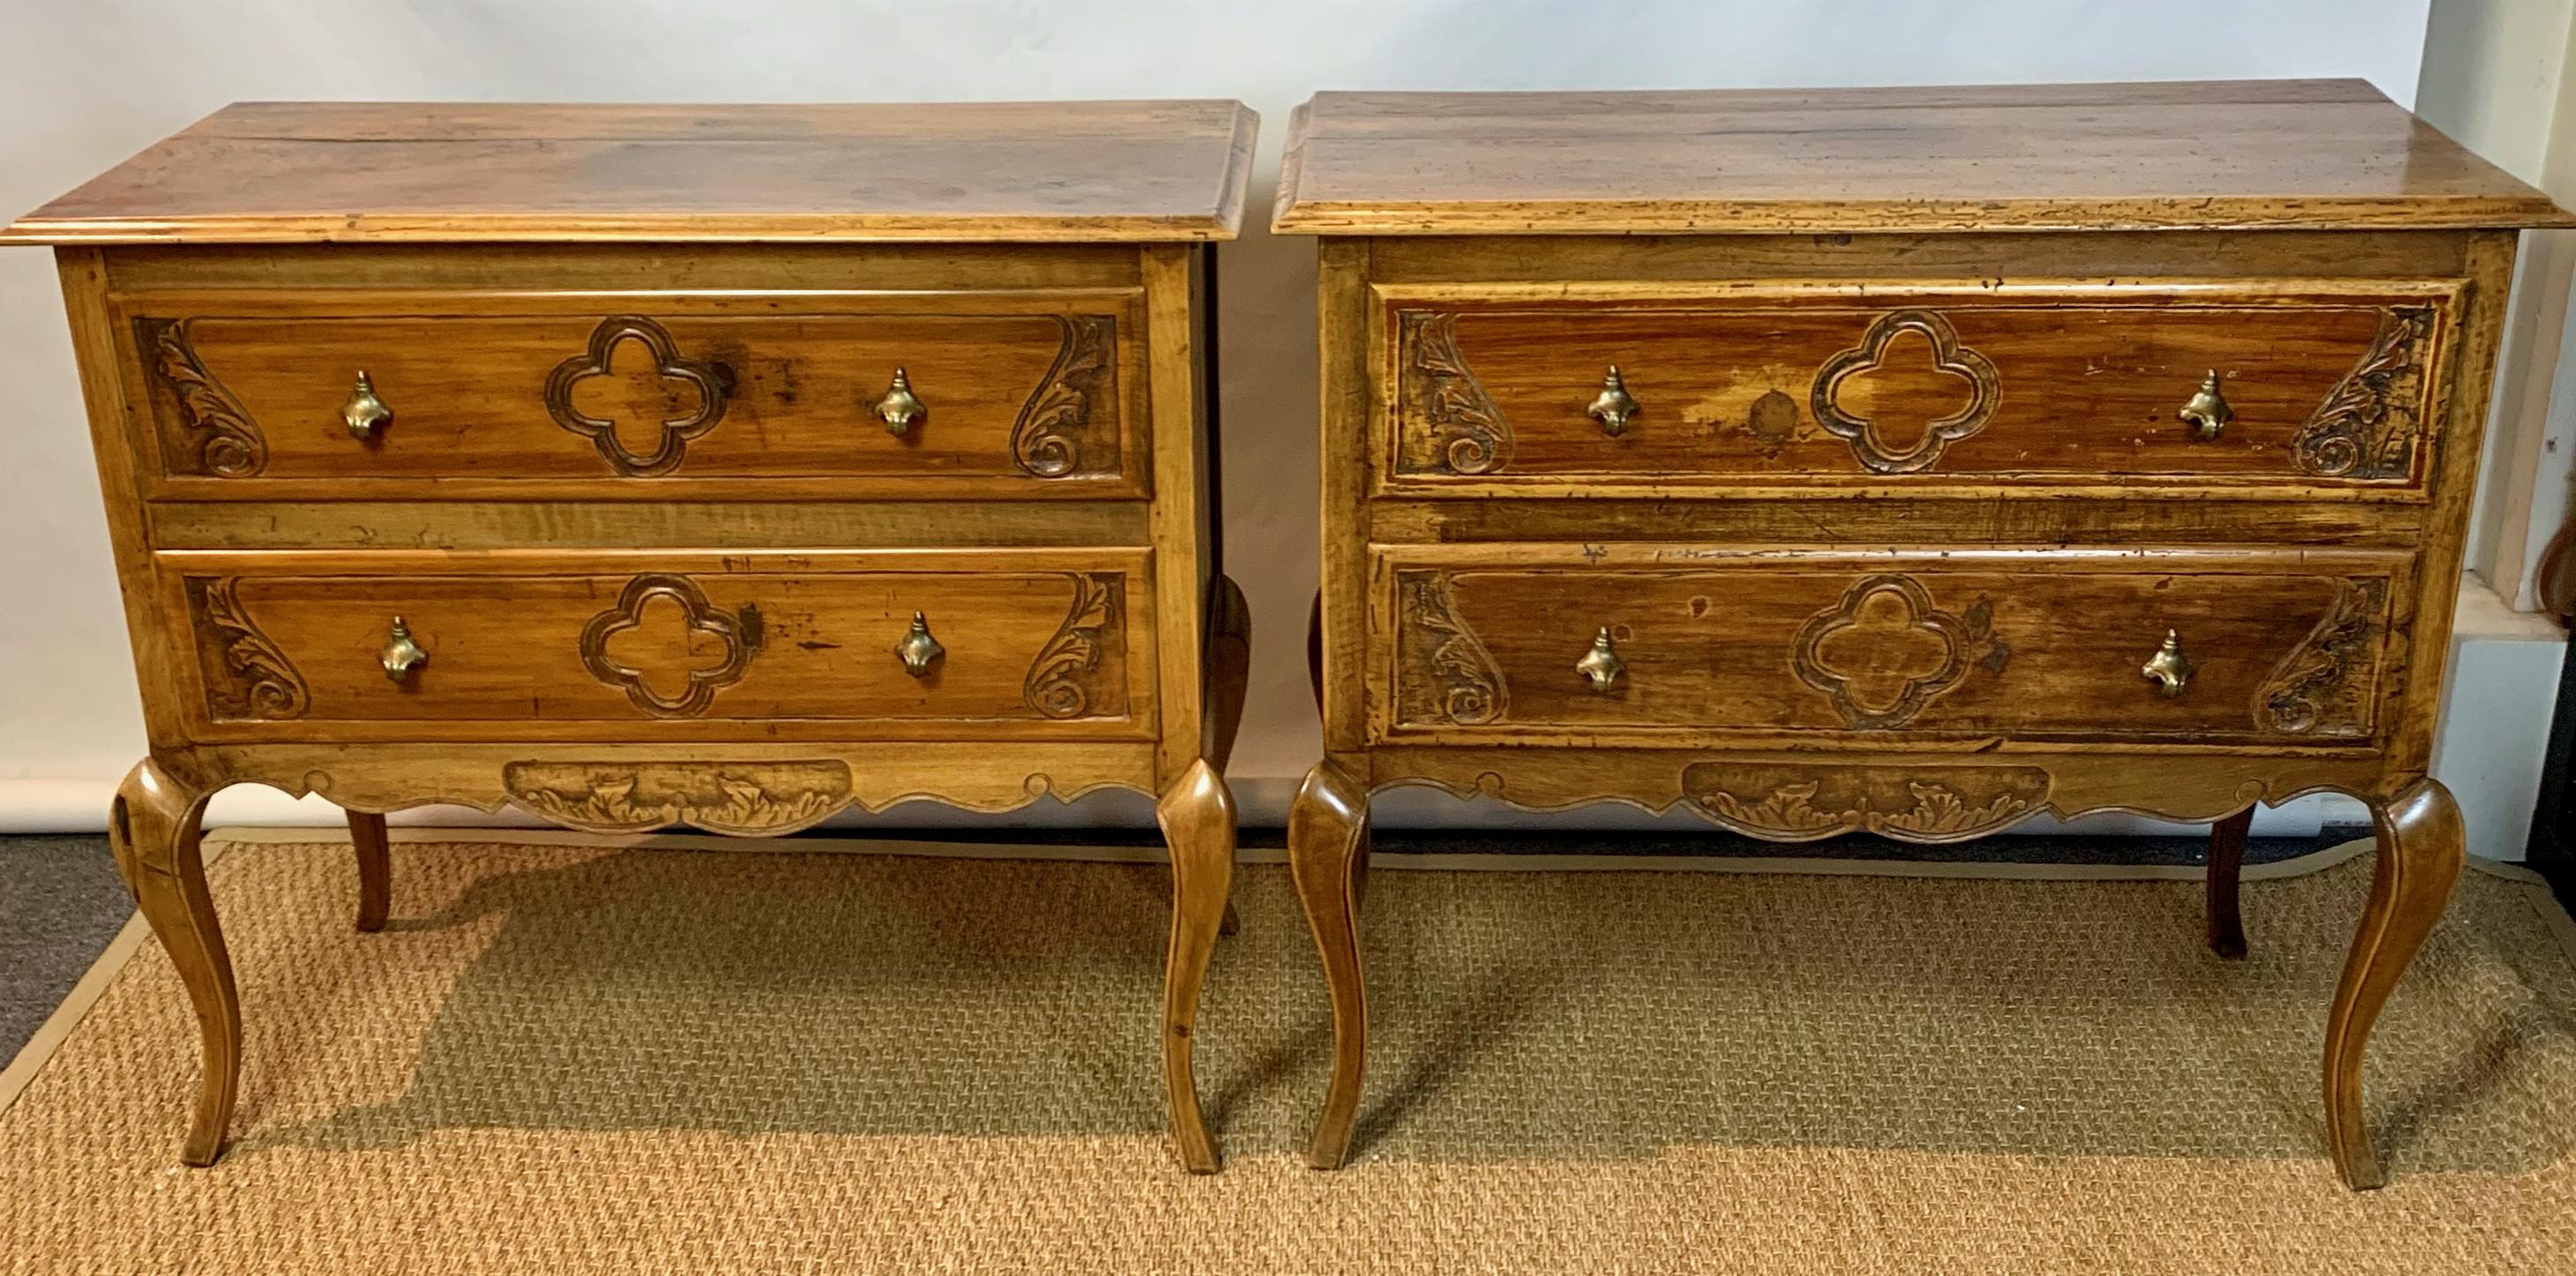 An attractive near pair of early 20th century Italian fruitwood two-drawer chests or bedside tables beautifully carved with inset acanthus leaves and clover designs with brass pulls over a scrolling apron terminating in shapely cabriole legs.